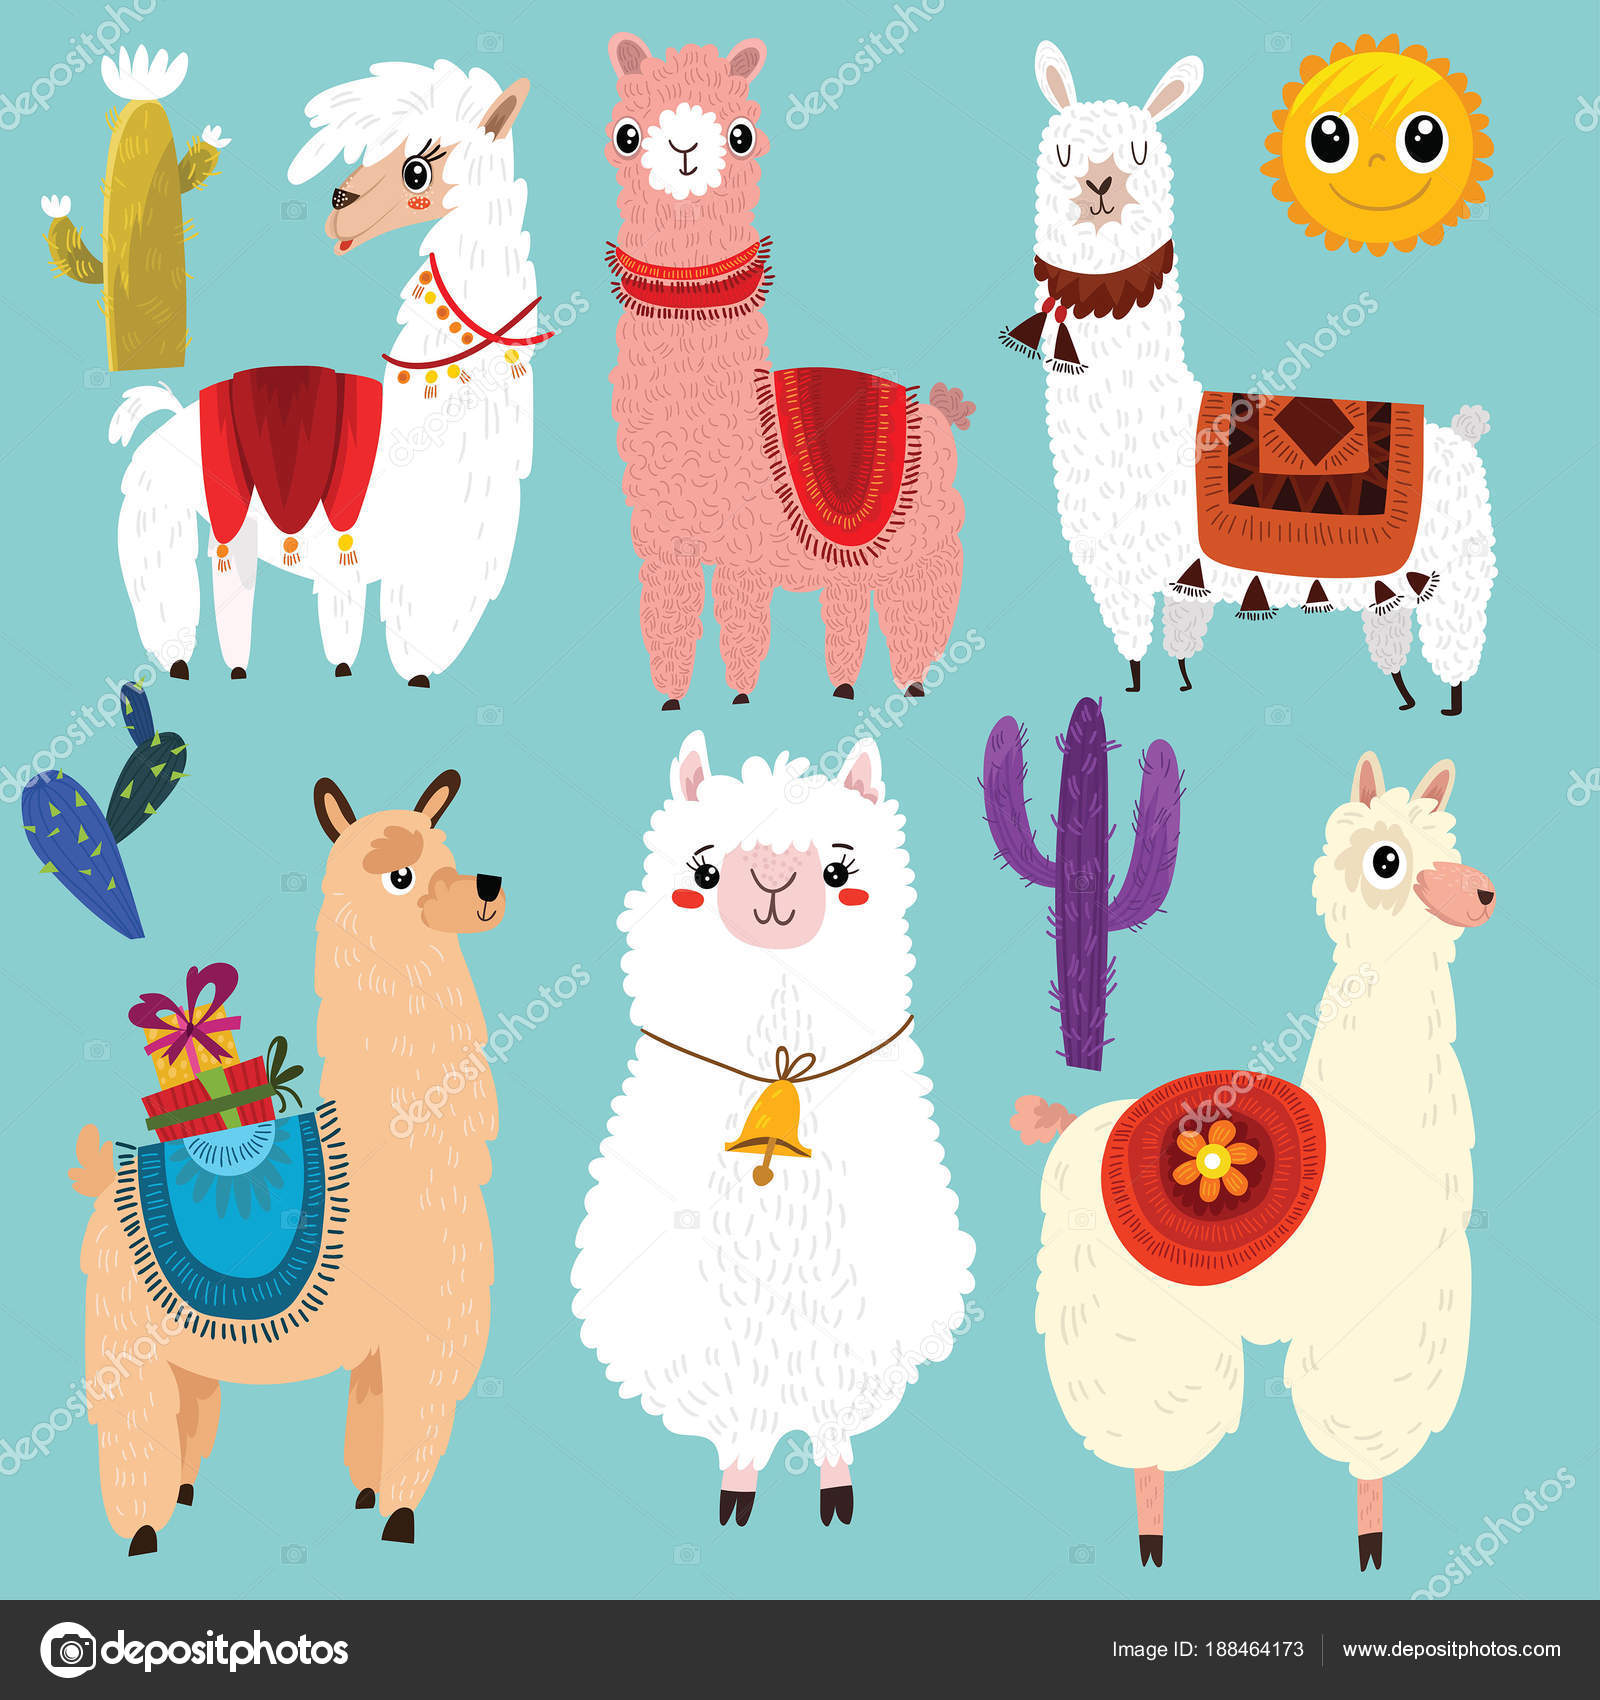 ᐈ Alpaca Stock Pictures Royalty Free Alpaca Cute Images Download On Depositphotos